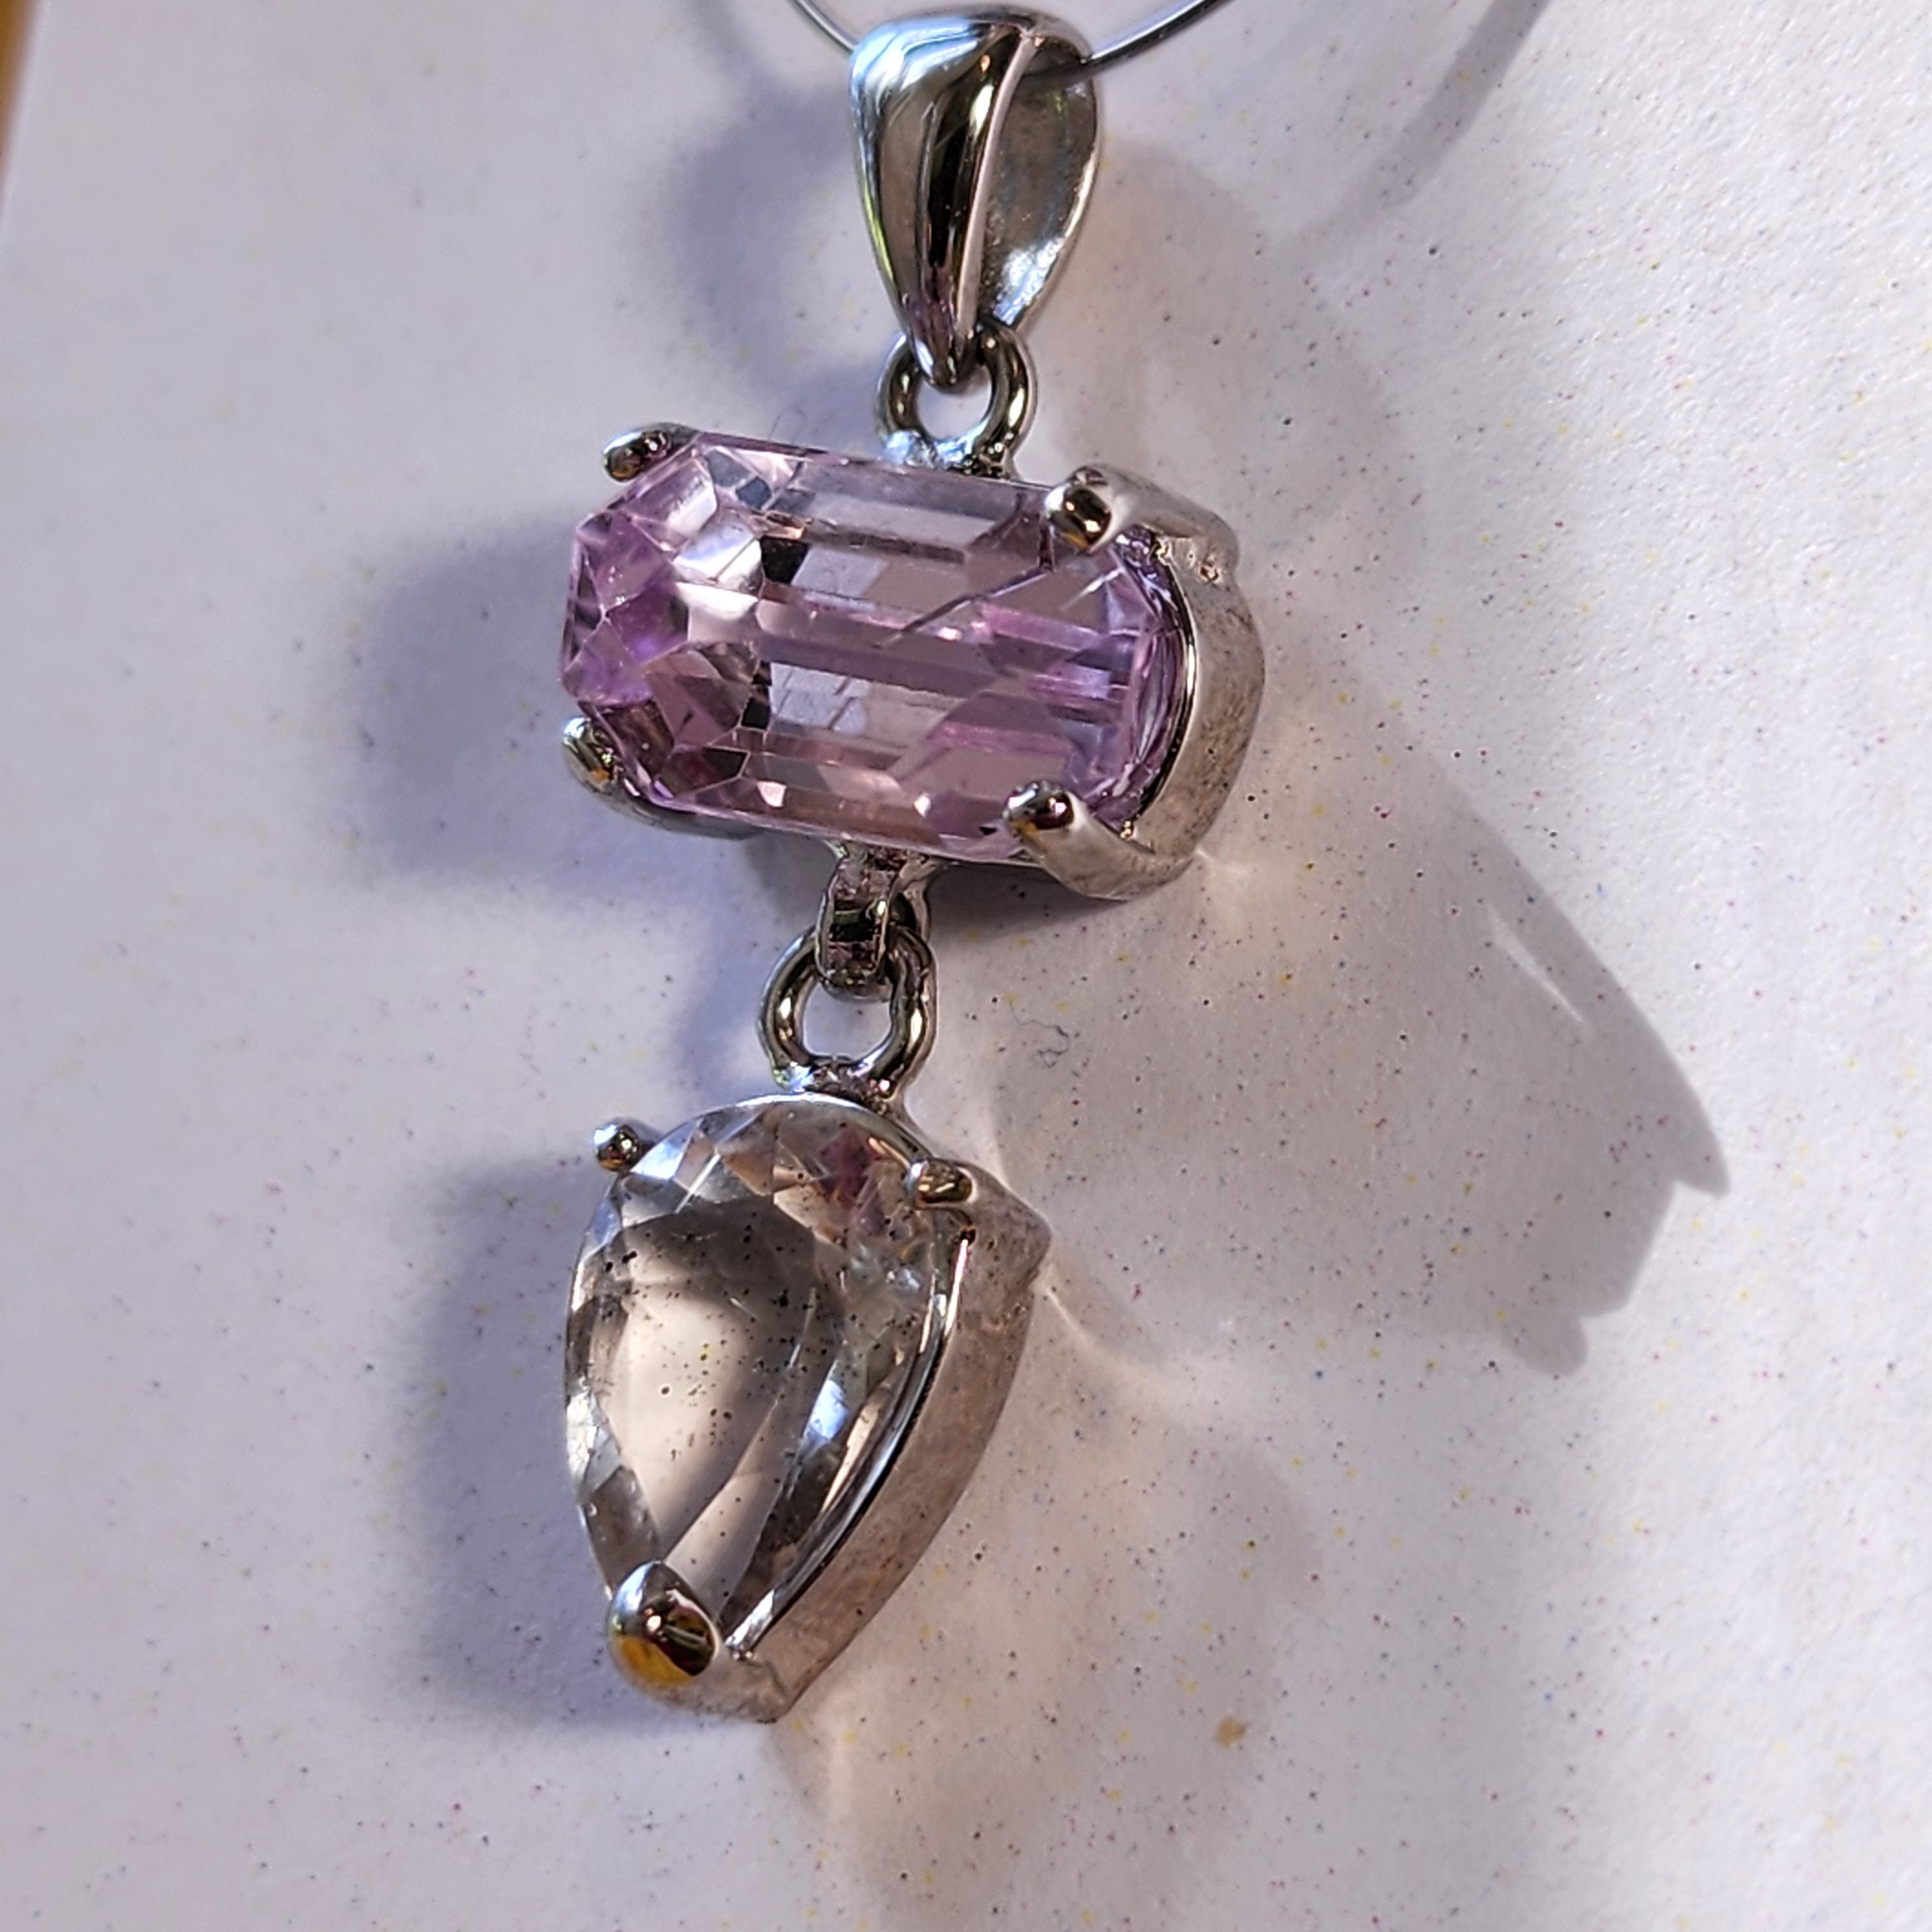 Kunzite with Silver Rutile x Pink Fire Covellite in Quartz Pendant .925 Silver (High Quality) for Healing, Spiritual Awakening and Opening Your Heart to Love